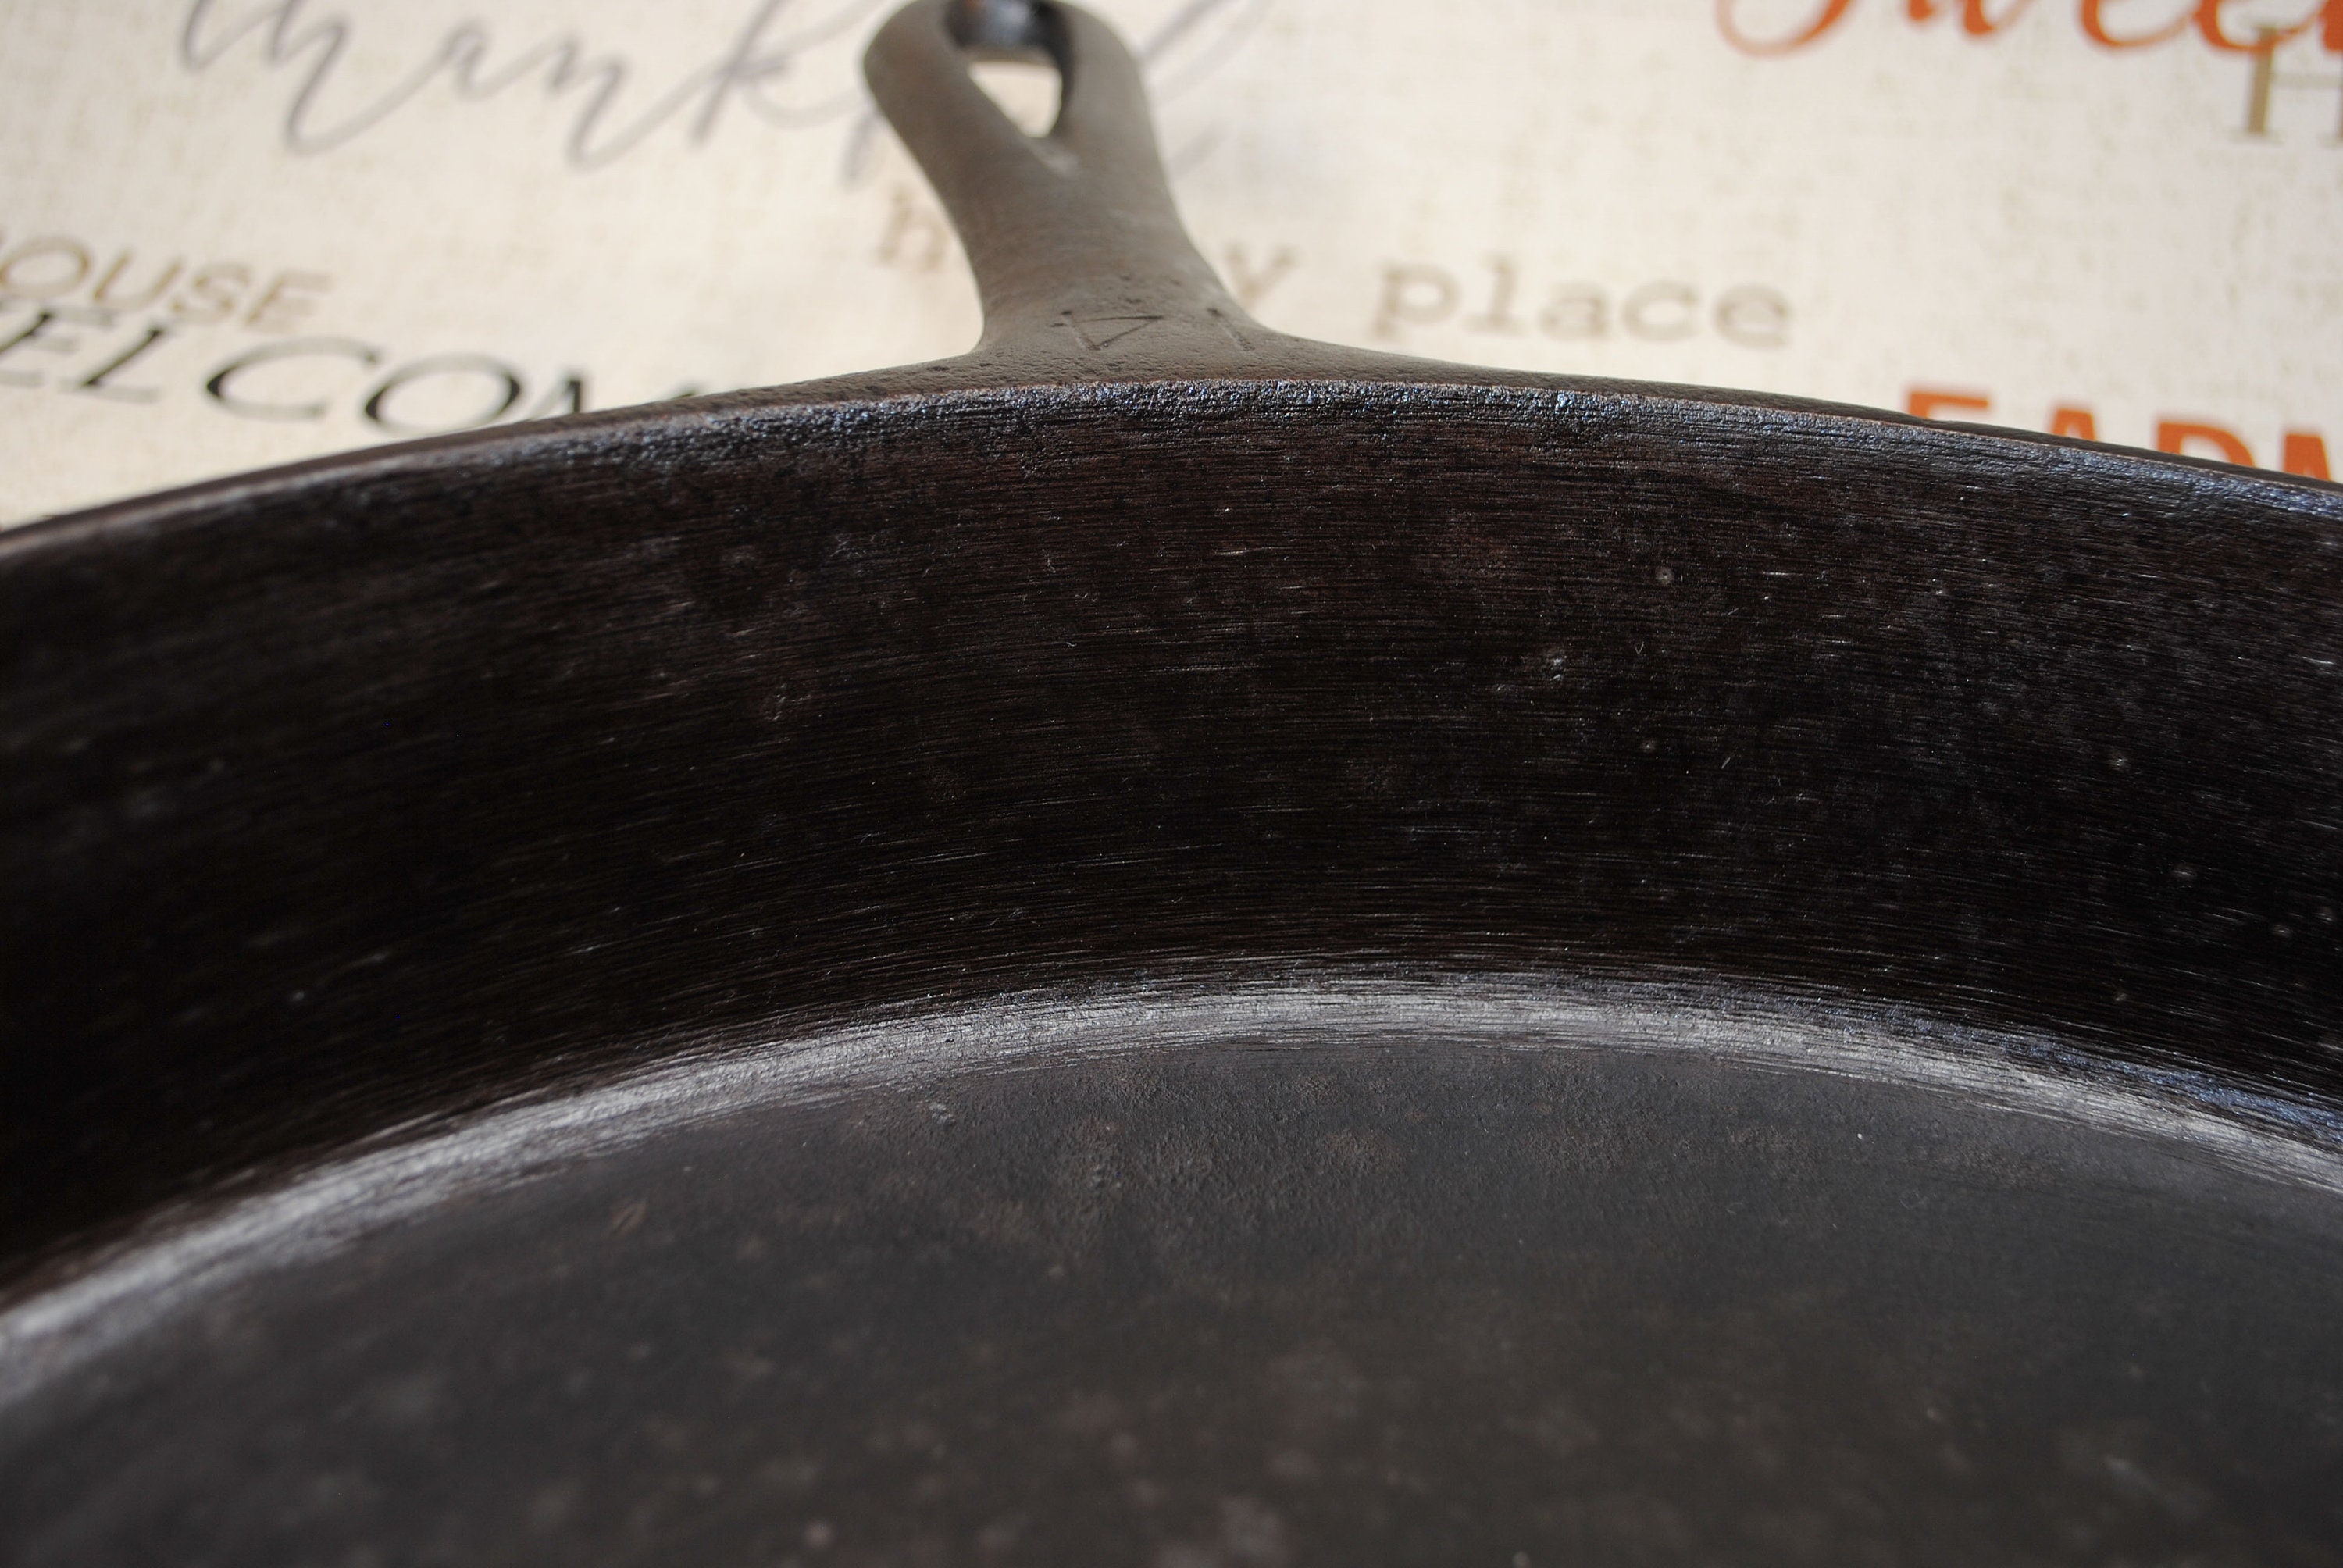 Wagner #14 Cast Iron Skillet - From Griswold Mold